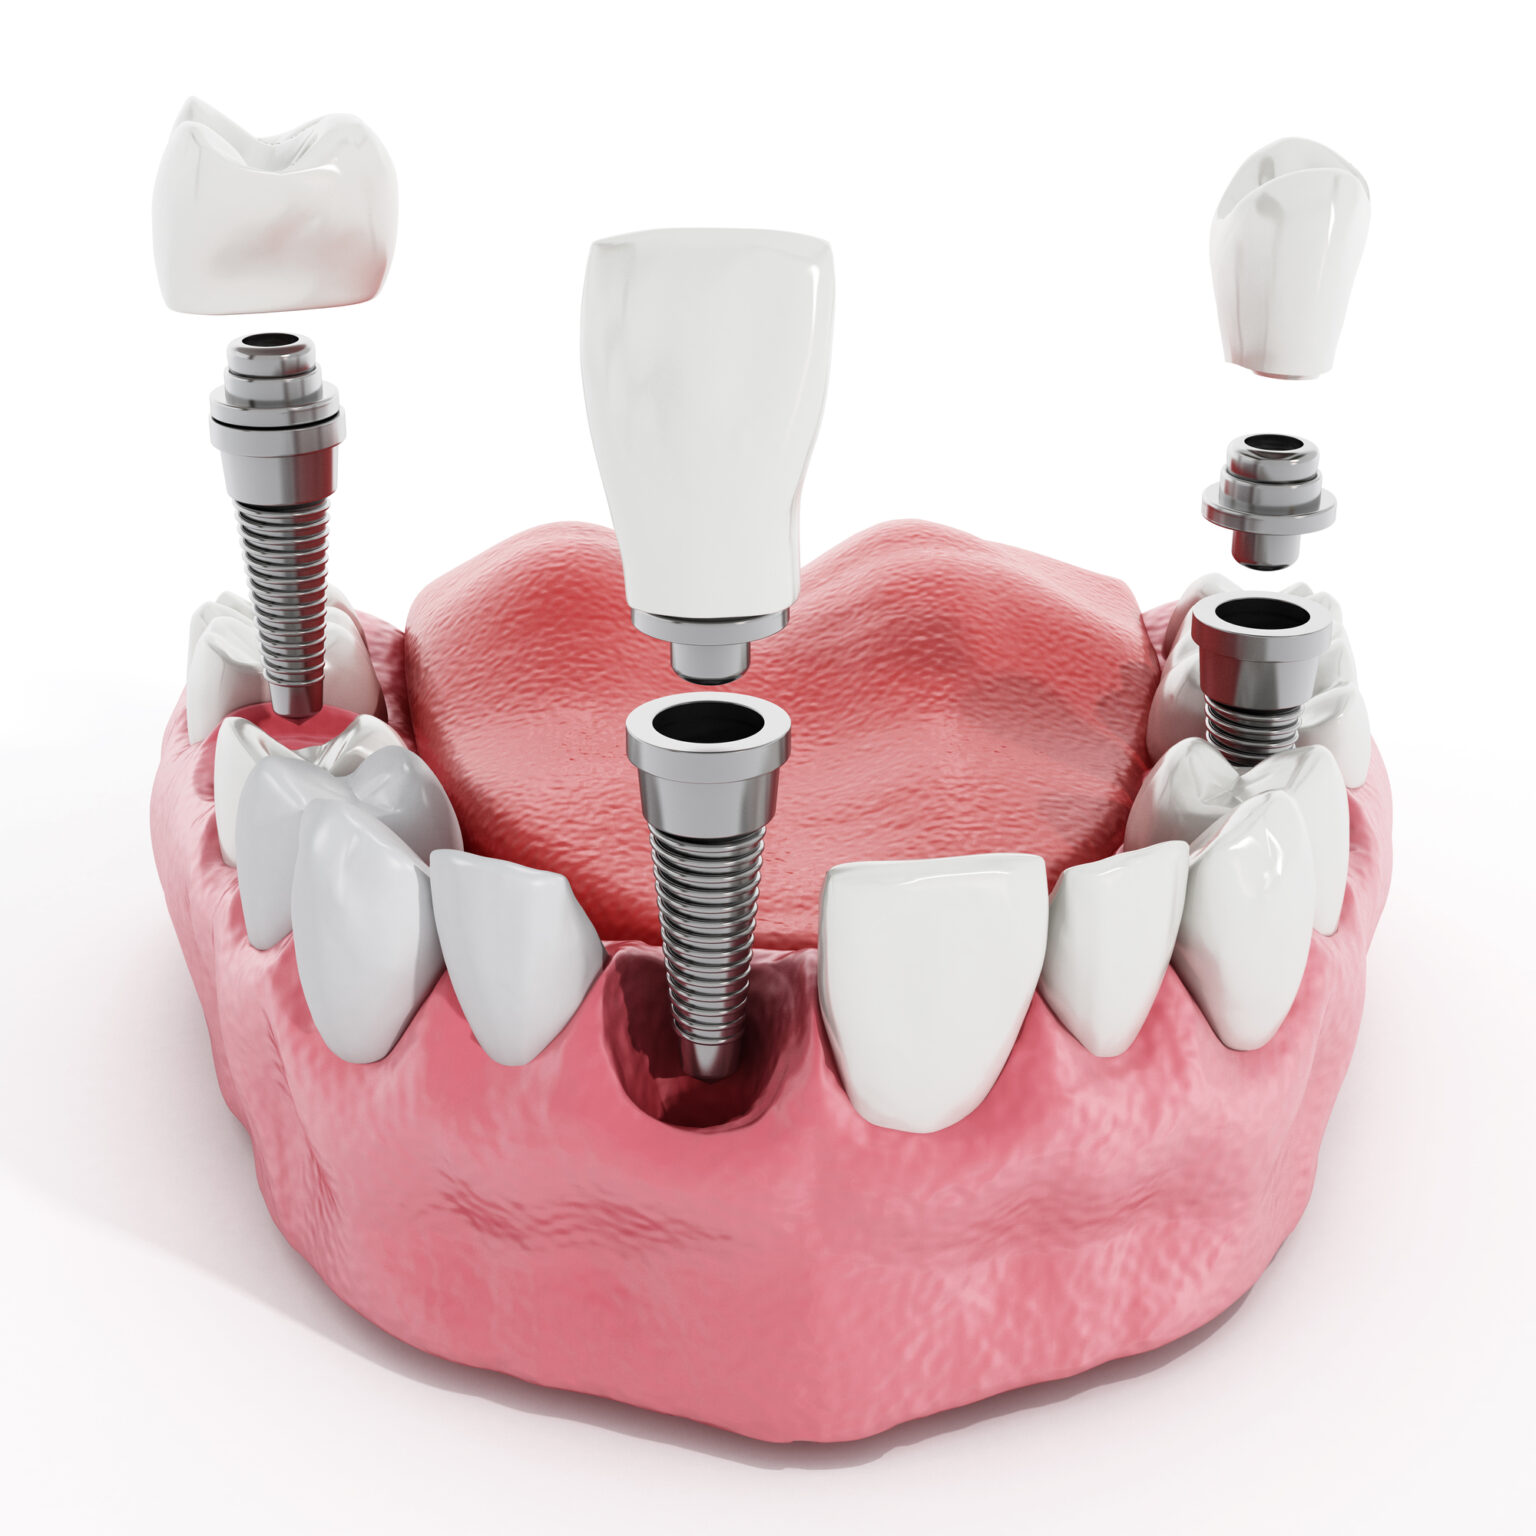 3d illustration of a dental implant procedure by an affordable Dallas dentist, showing implant posts, abutments, and crowns next to natural teeth on a gum model.